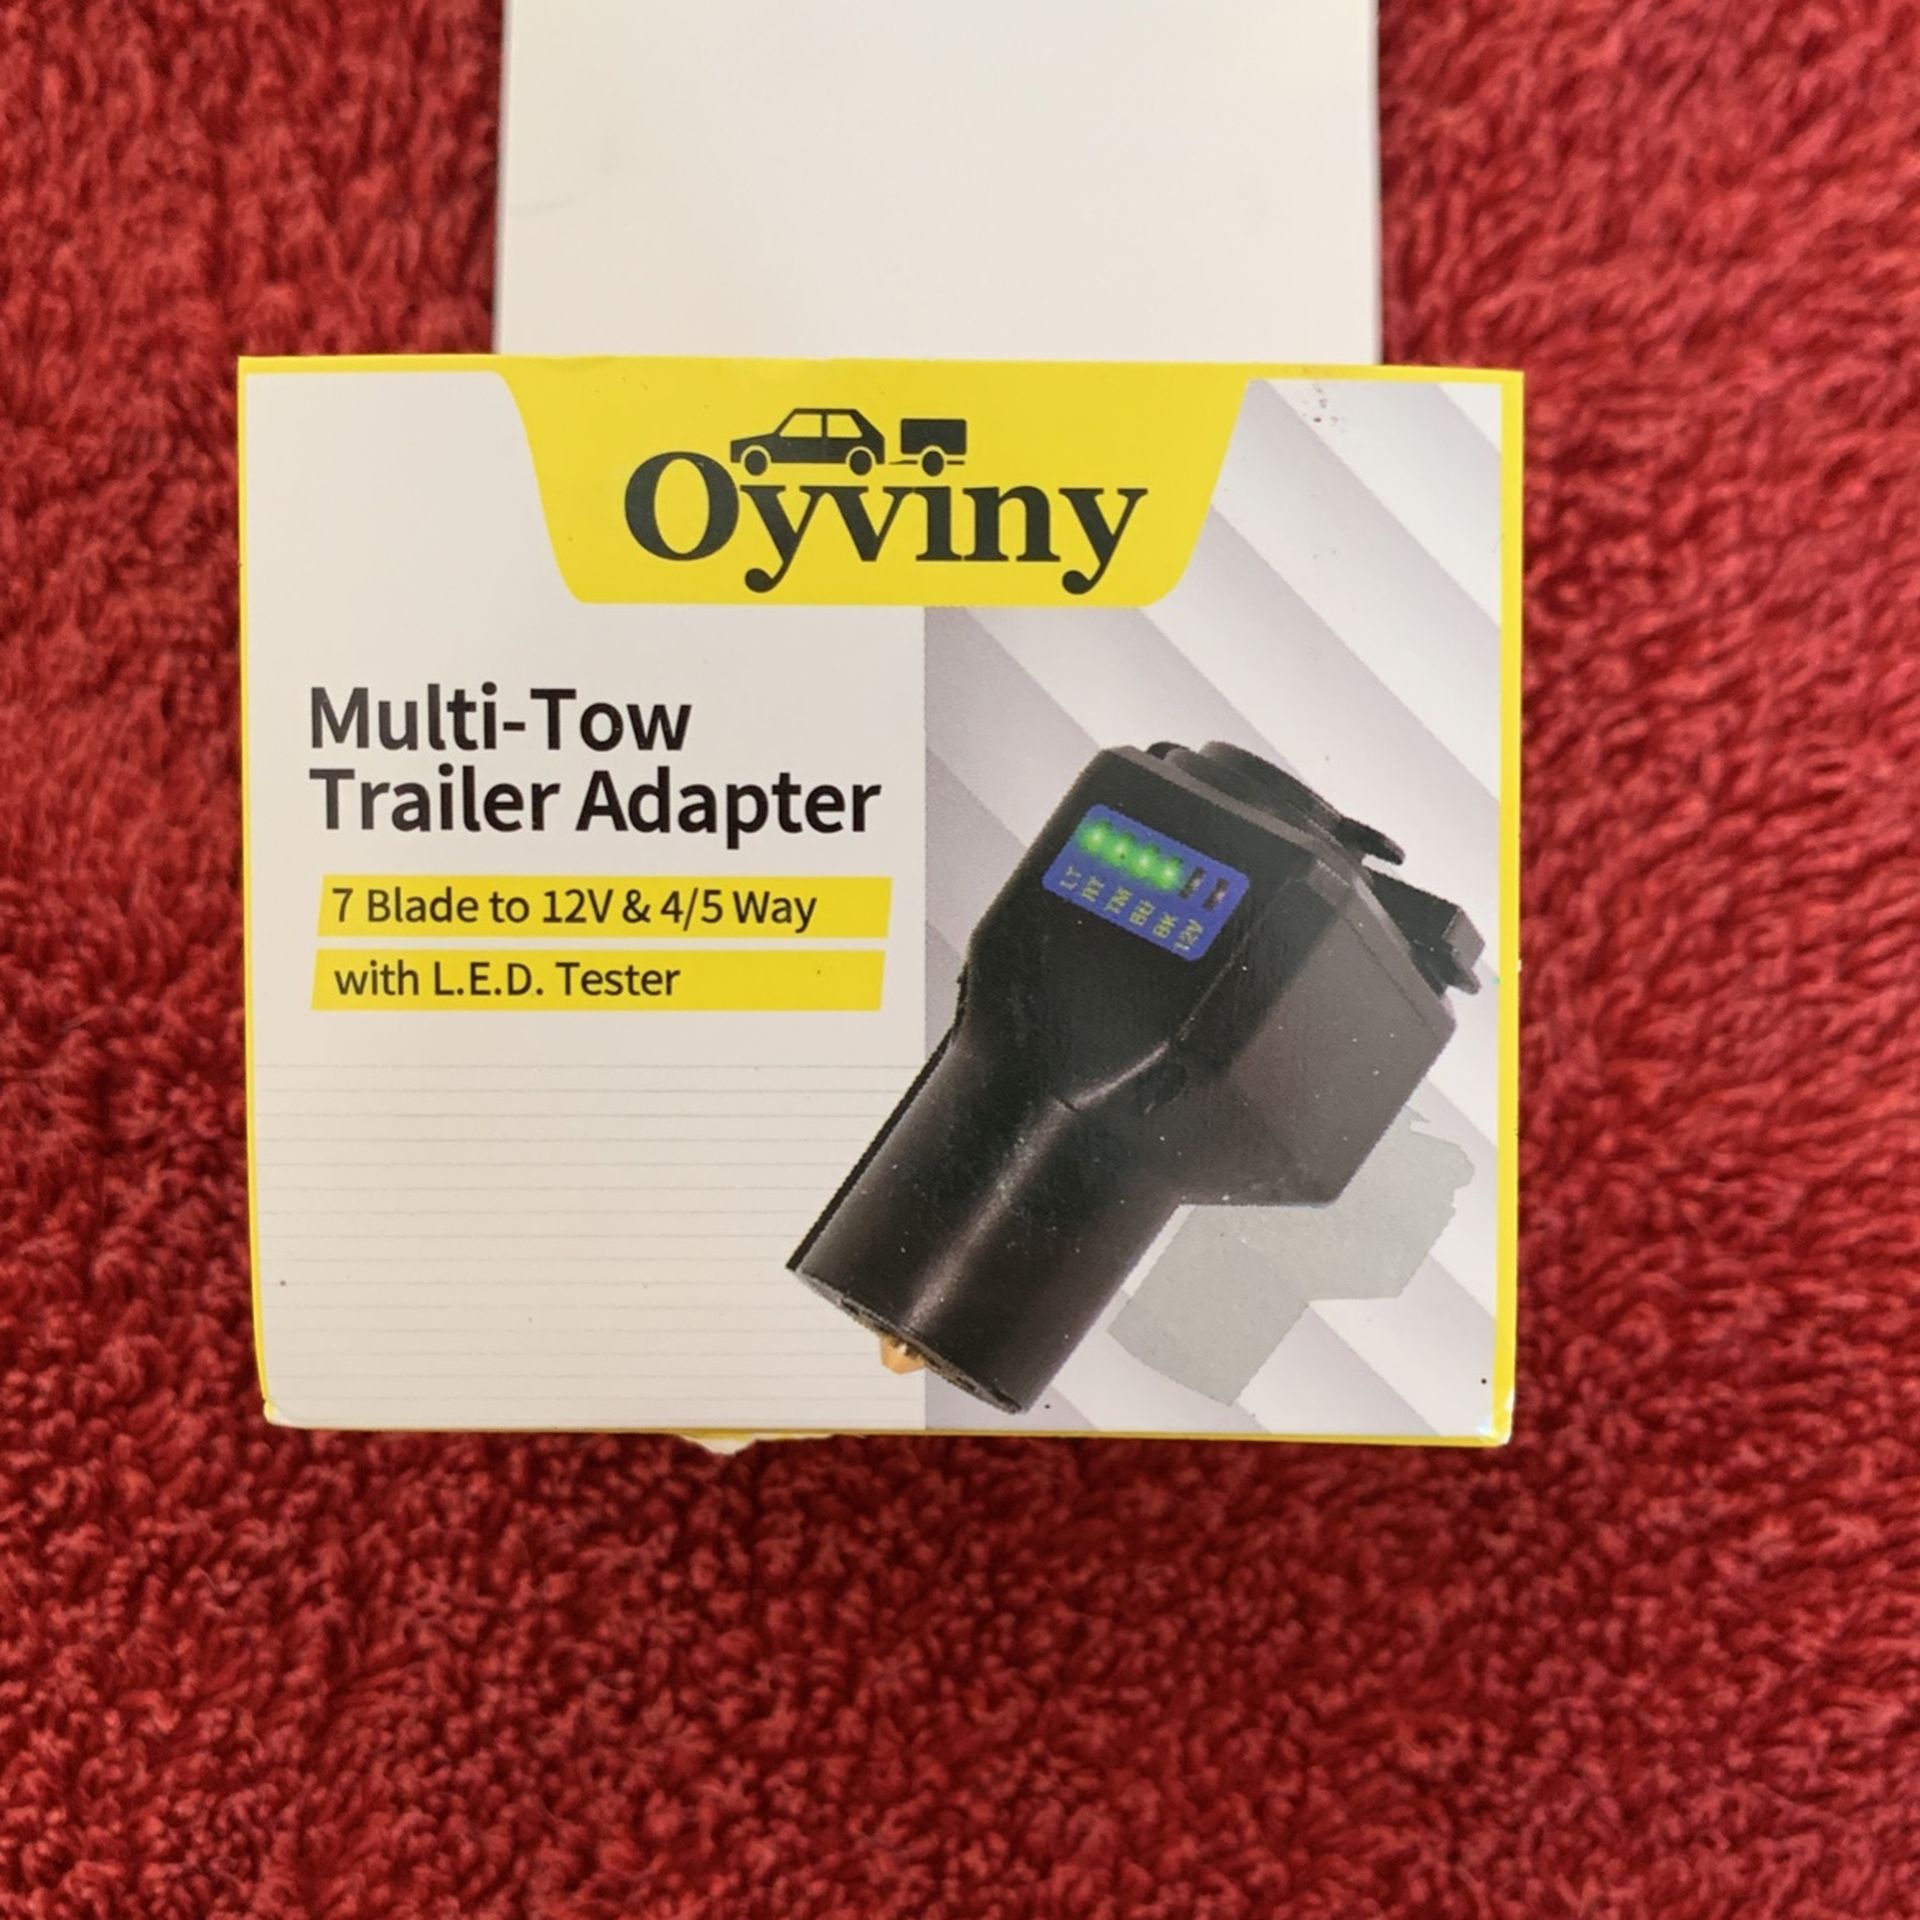 Oyviny 7 Way Blade To 12V Adapter With LED Tester for Sale in